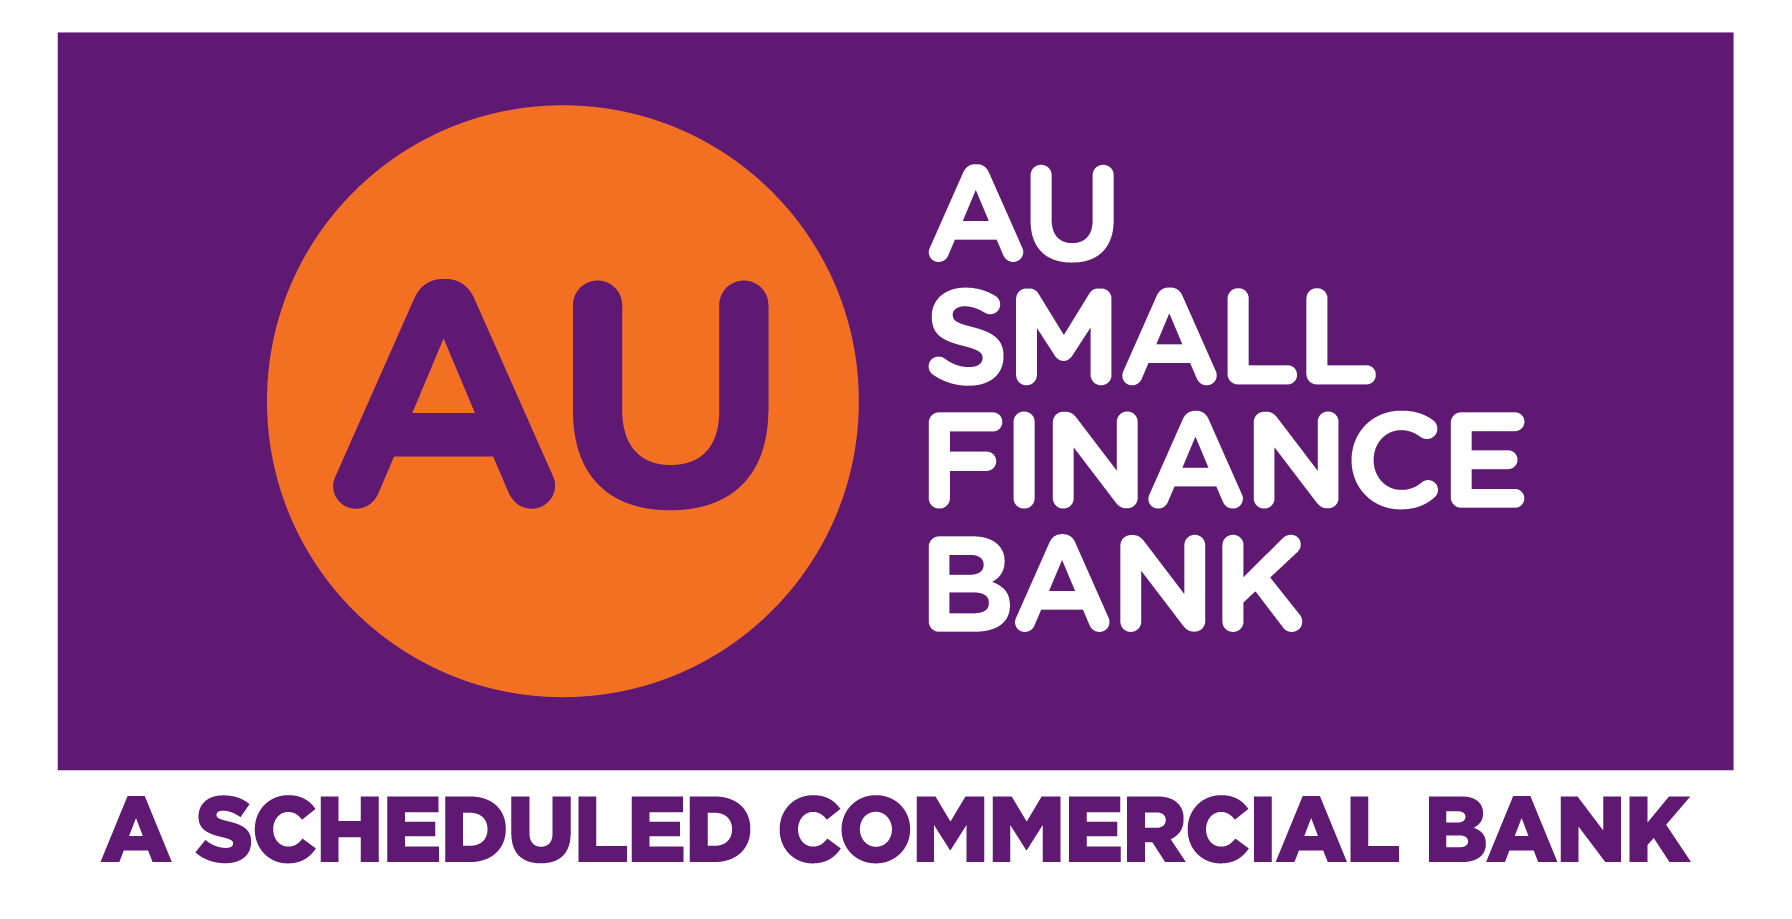 AU bank Scheduled commercial bank logo-01